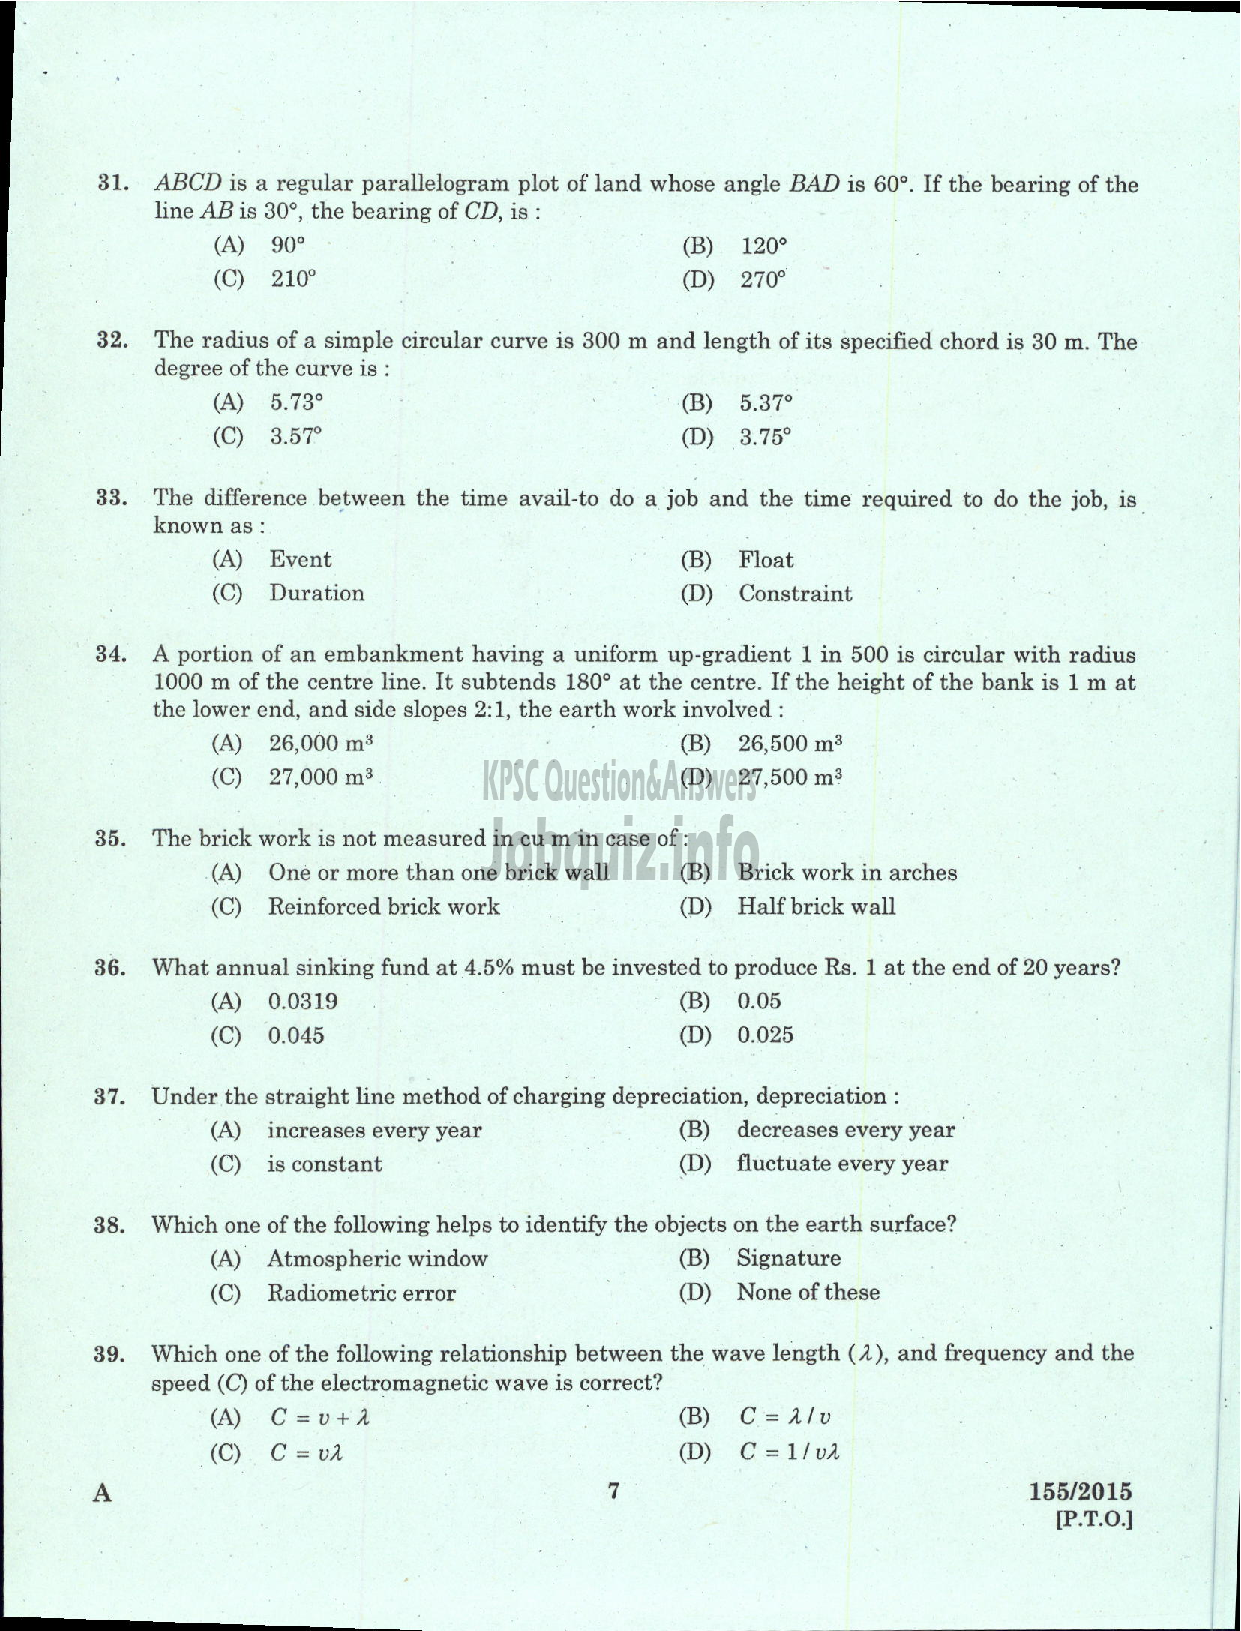 Kerala PSC Question Paper - ASSISTANT TOWN PLANNER TOWN AND COUNTRY PLANNING-5